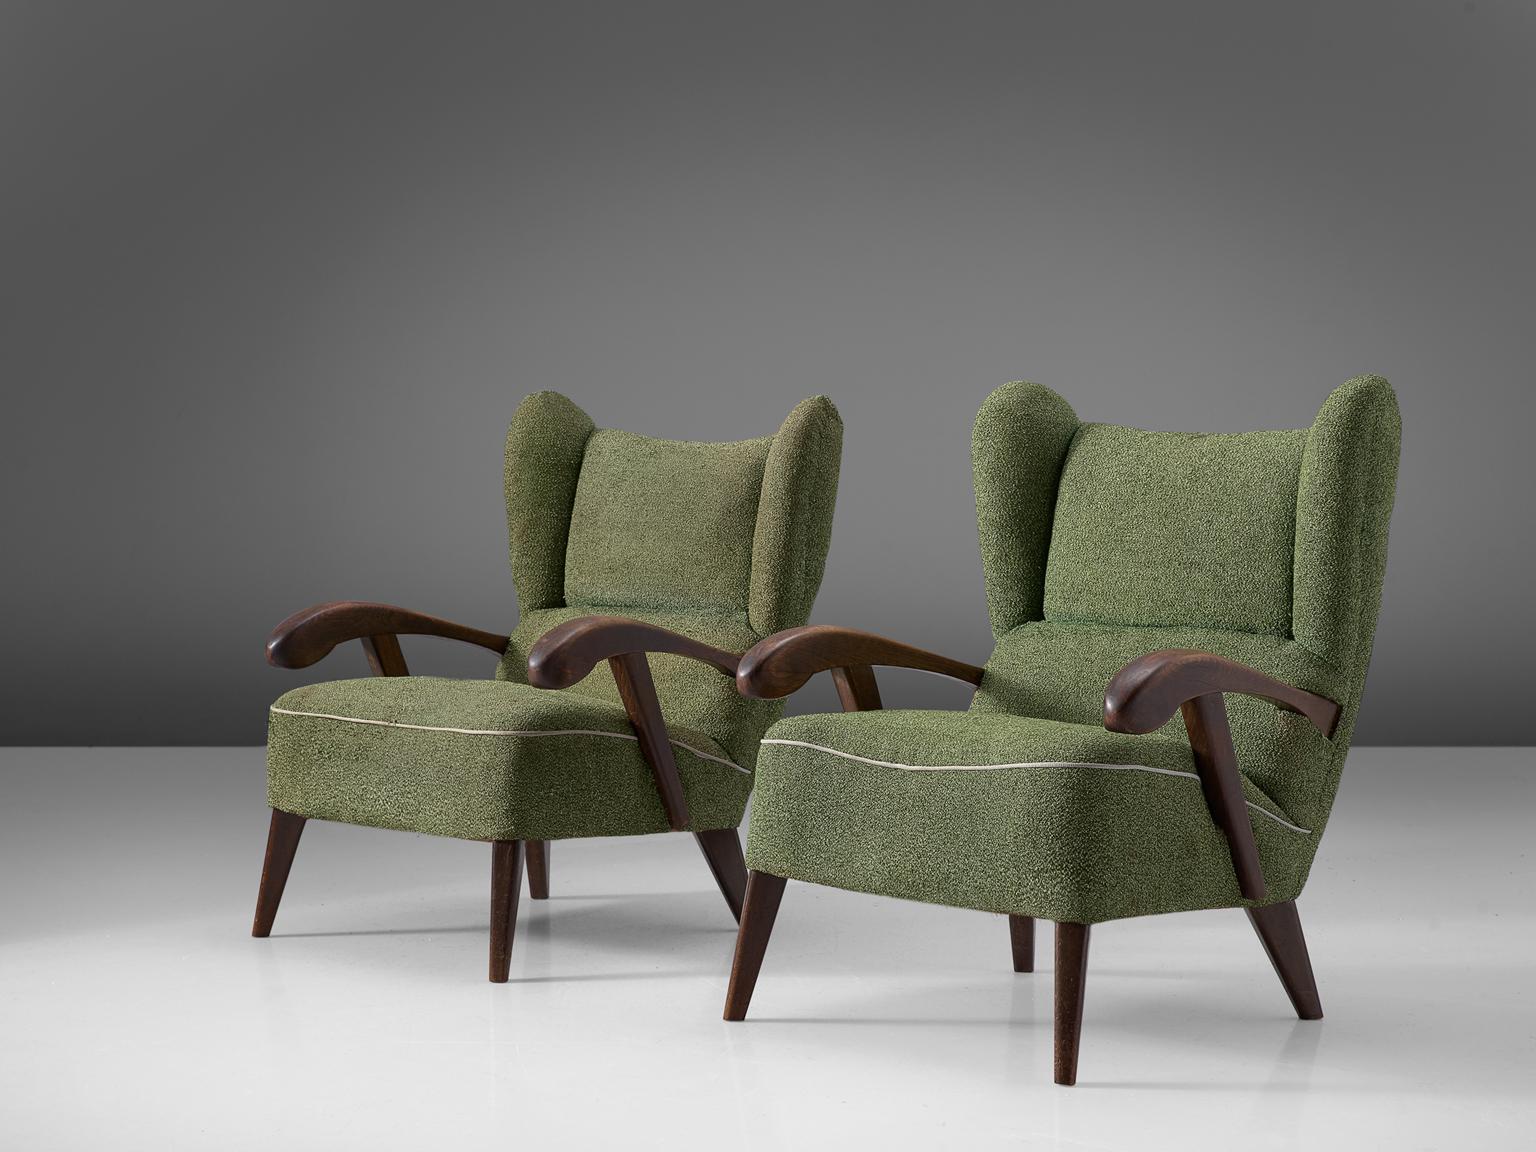 Set of two lounge chairs, in stained beech and green fabric, Czech Republic, 1950s. 

Elegant pair of two wingback chairs with solid beech frame. The grain of the stained wood is nicely visible, especially on the wide sculpted armrests. The wooden